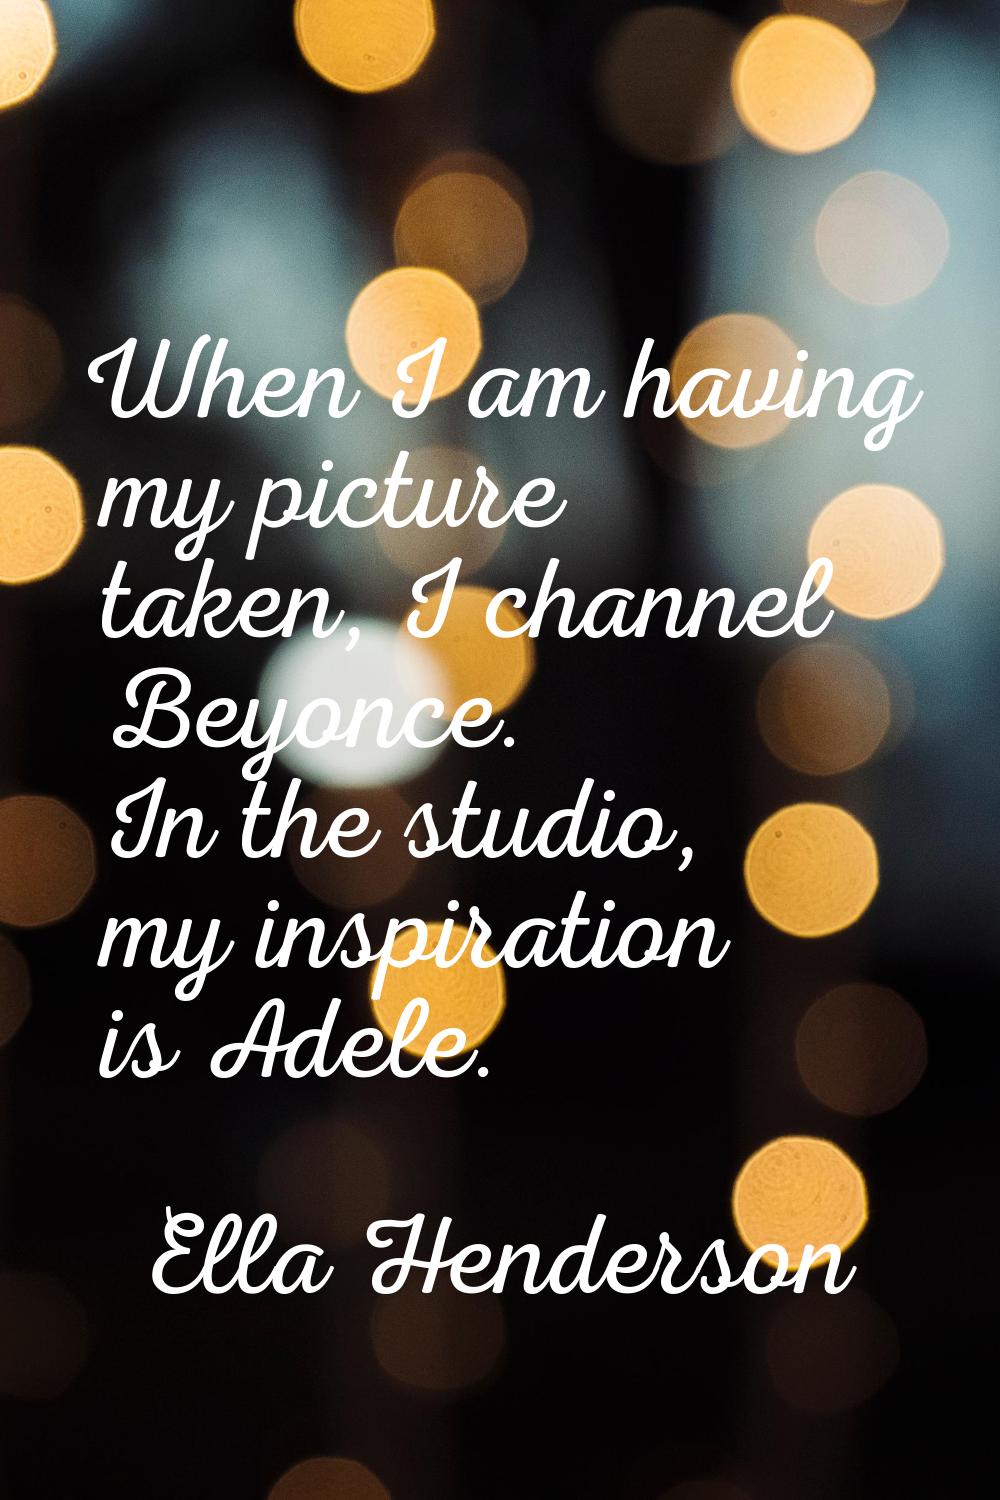 When I am having my picture taken, I channel Beyonce. In the studio, my inspiration is Adele.